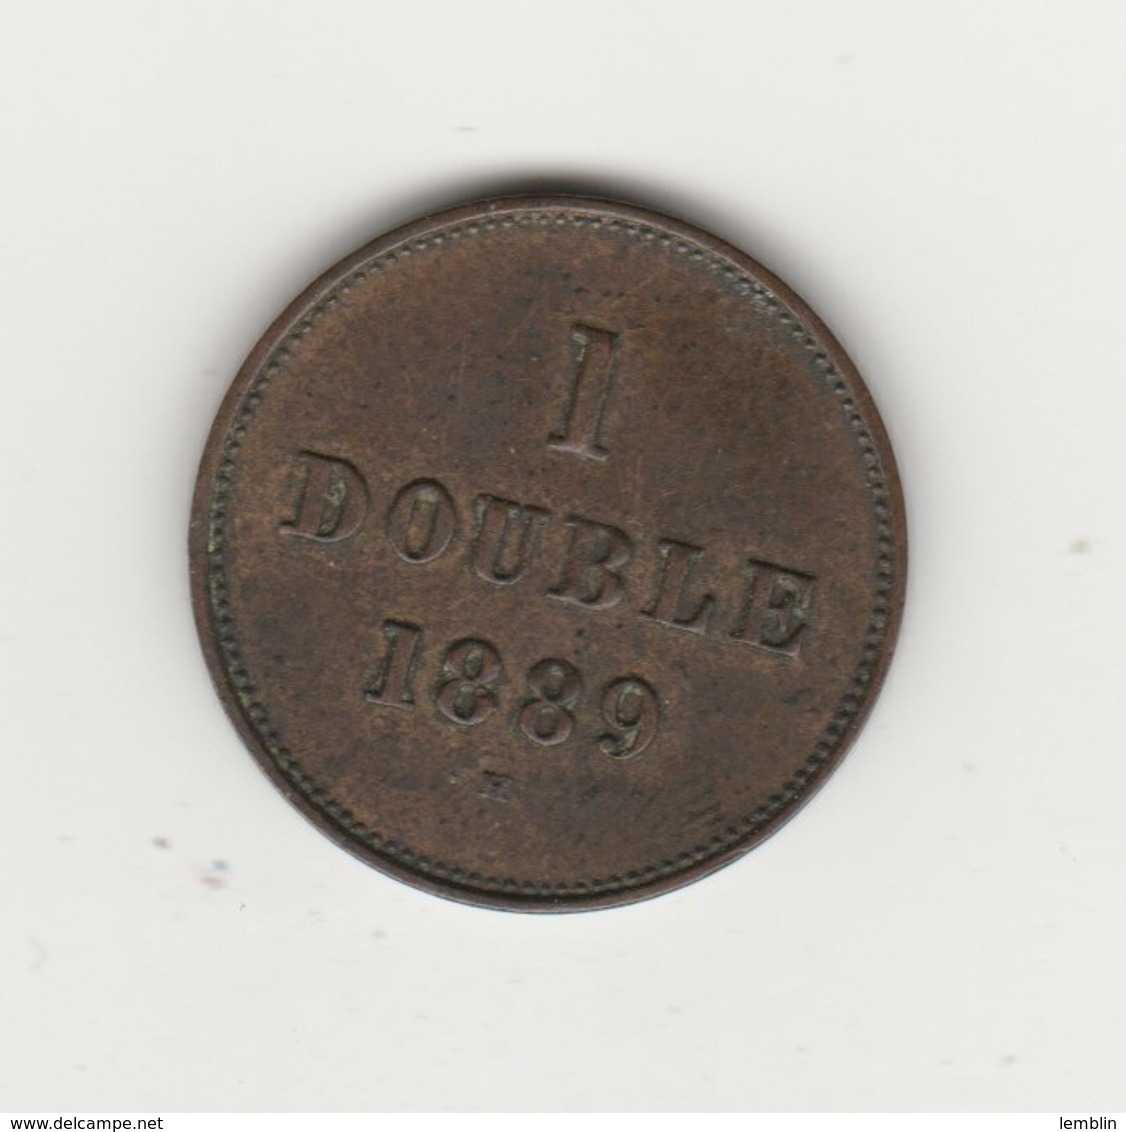 1 DOUBLE 1889 - Guernsey